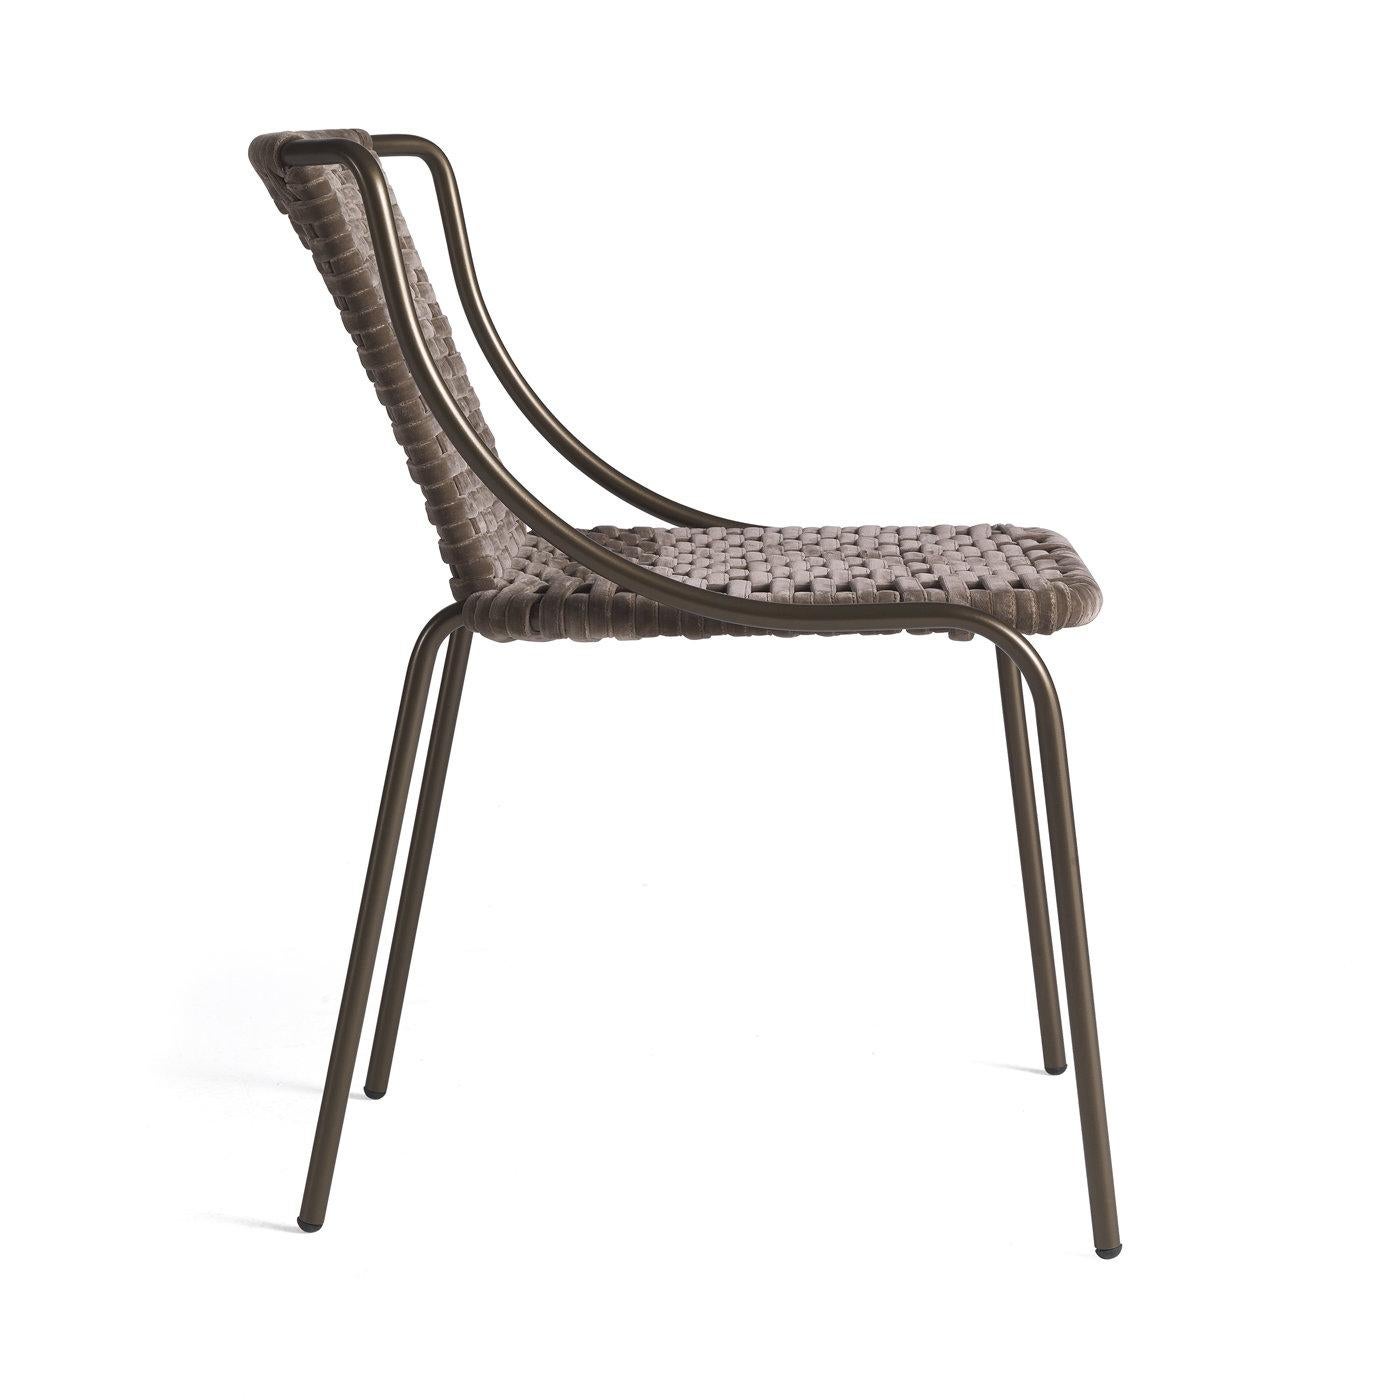 This chair is a splendid versatile piece that will complement any dining table from the same collection. Composed of a sinuous, metal structure with slightly slanted legs, it is marked by a braided seat and back made of gunmetal gray velvet, adding